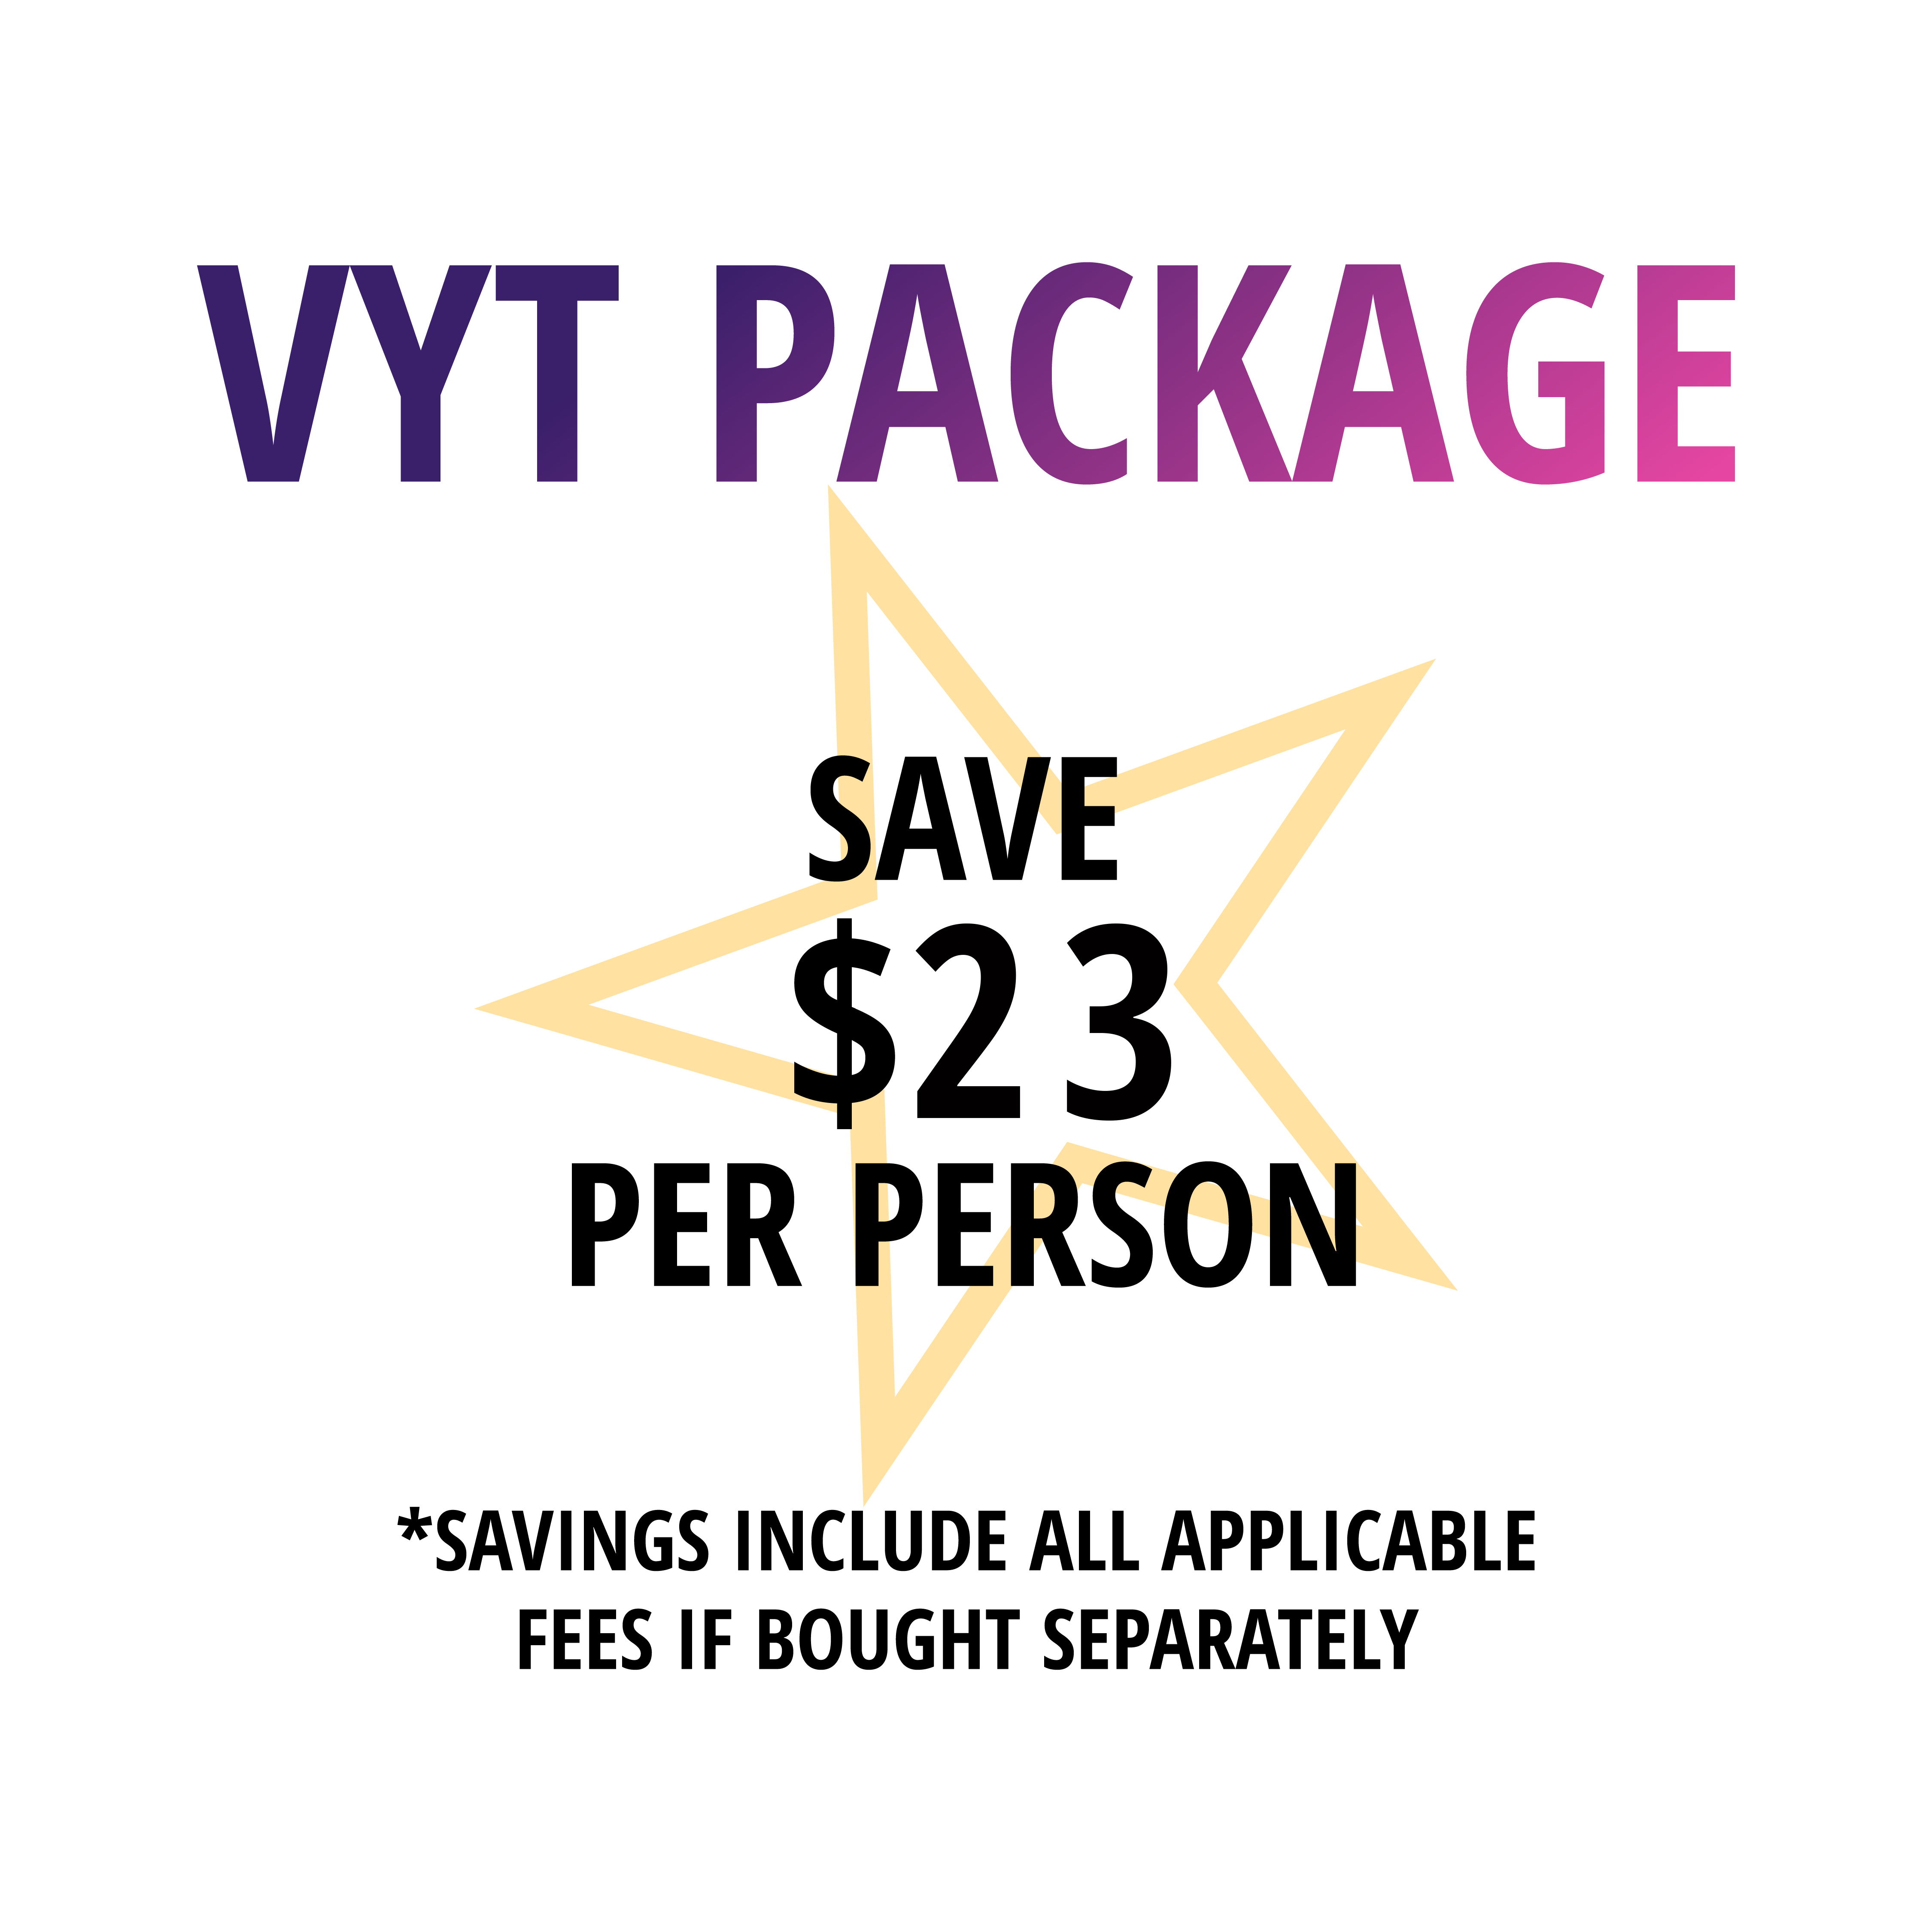 vyt-package-2425-1